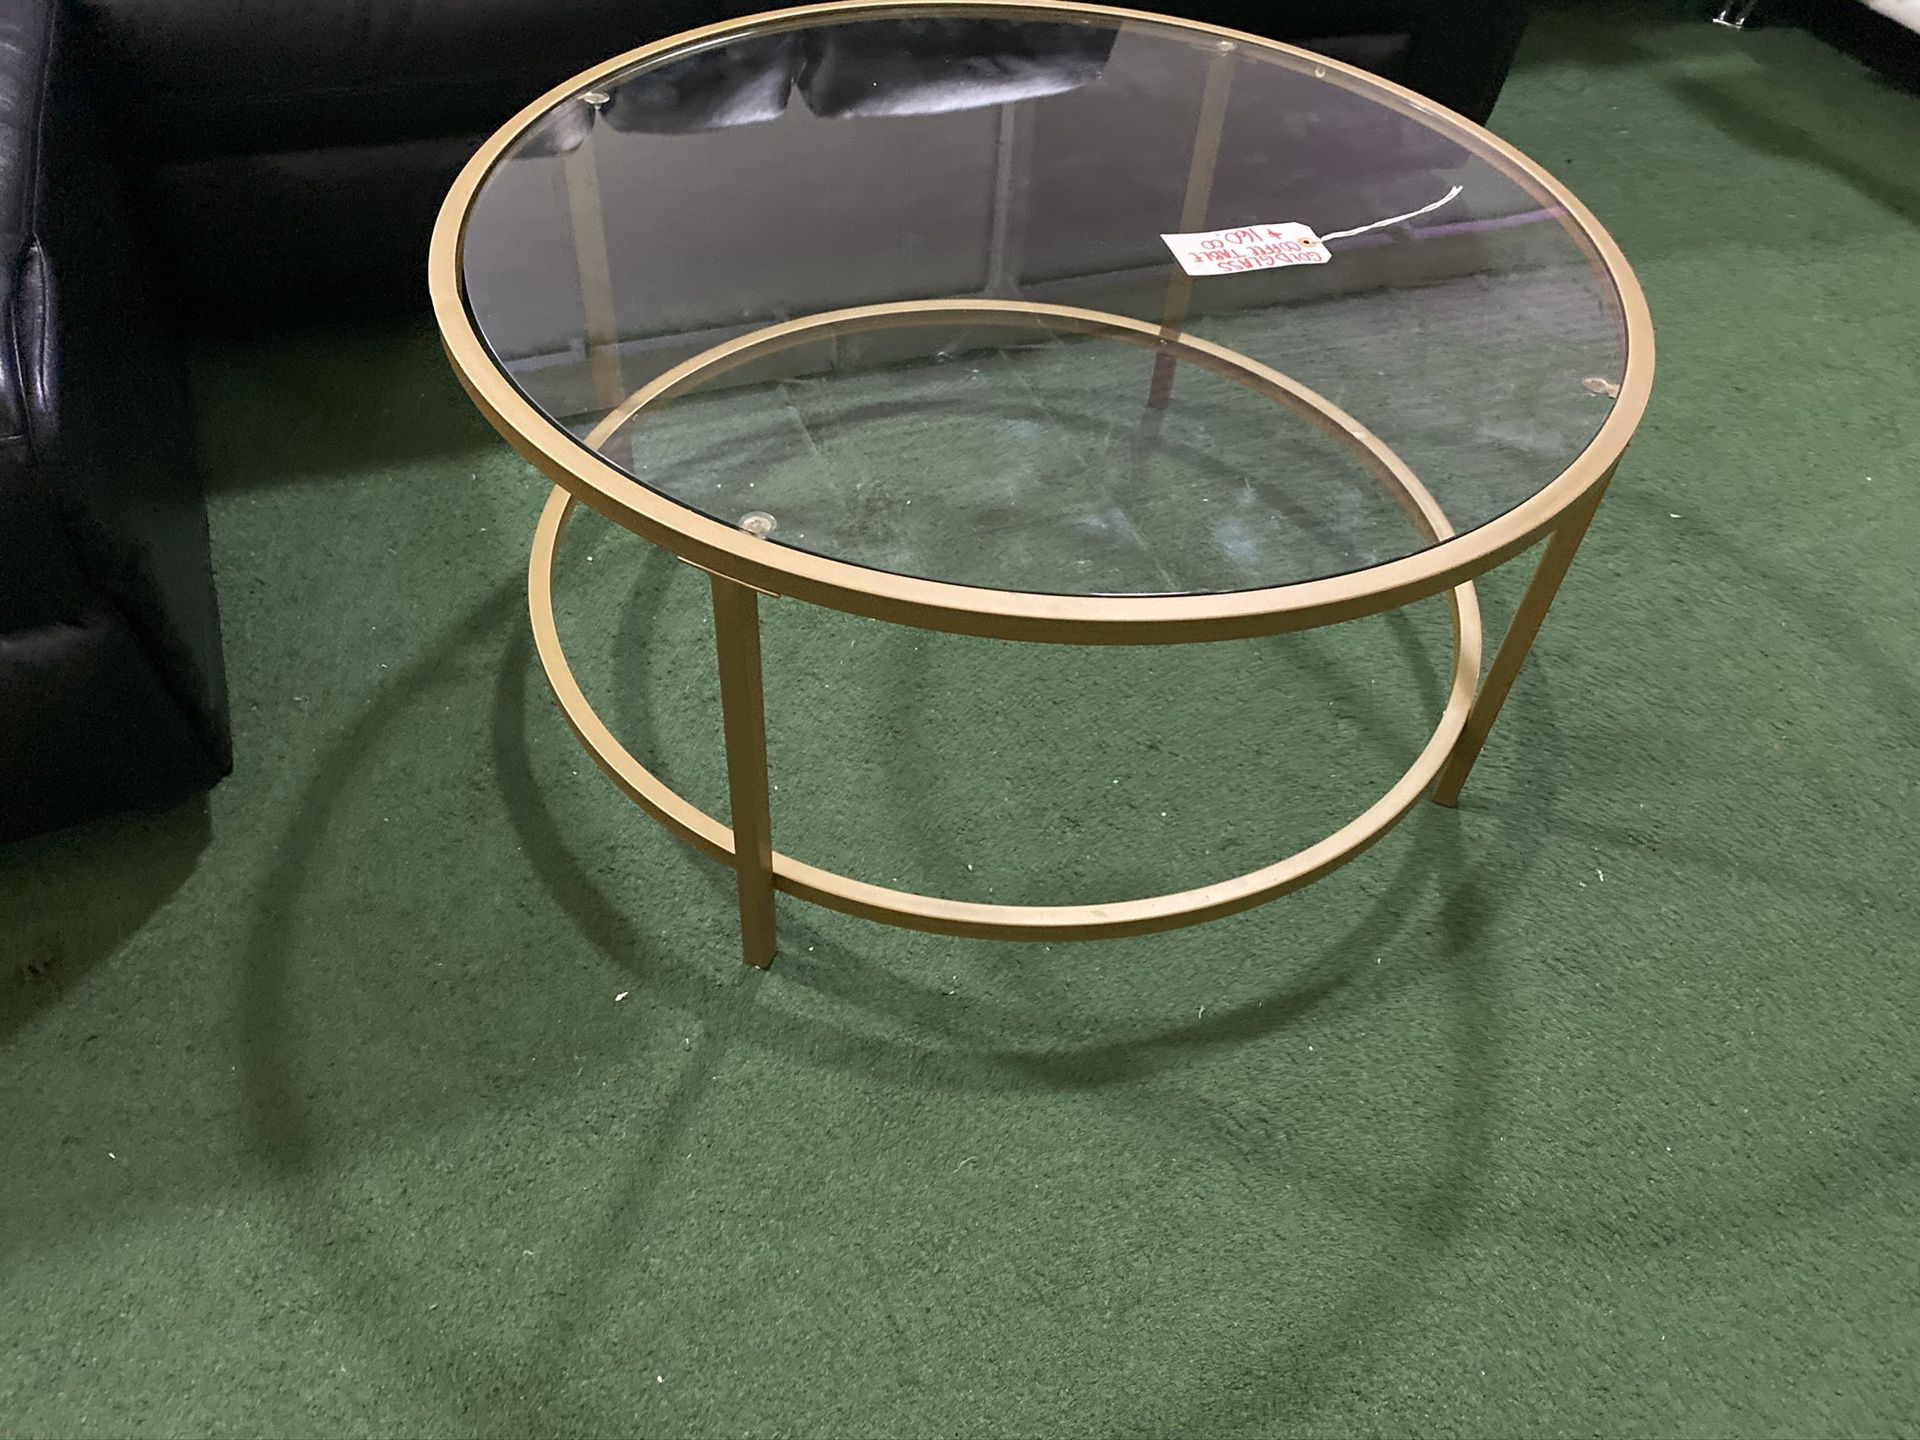 Brand new coffee table glass with gold trim